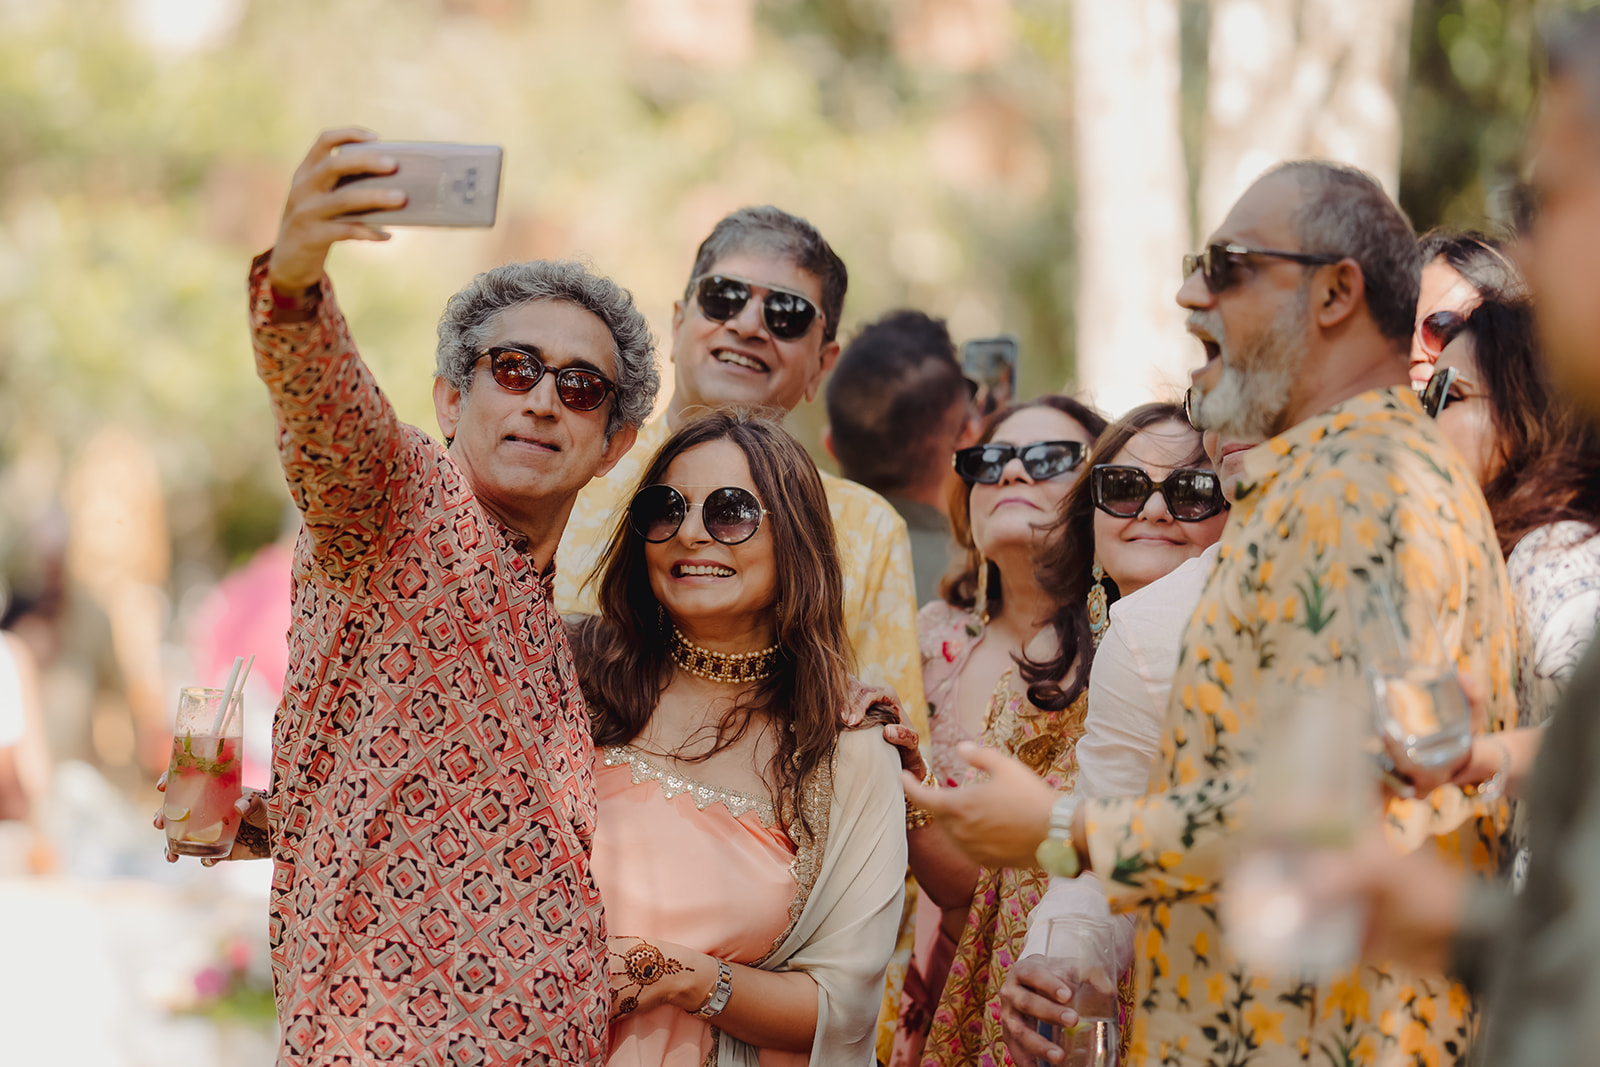 Selfie time: Guest snaps a picture, contributing to the lively event ambiance